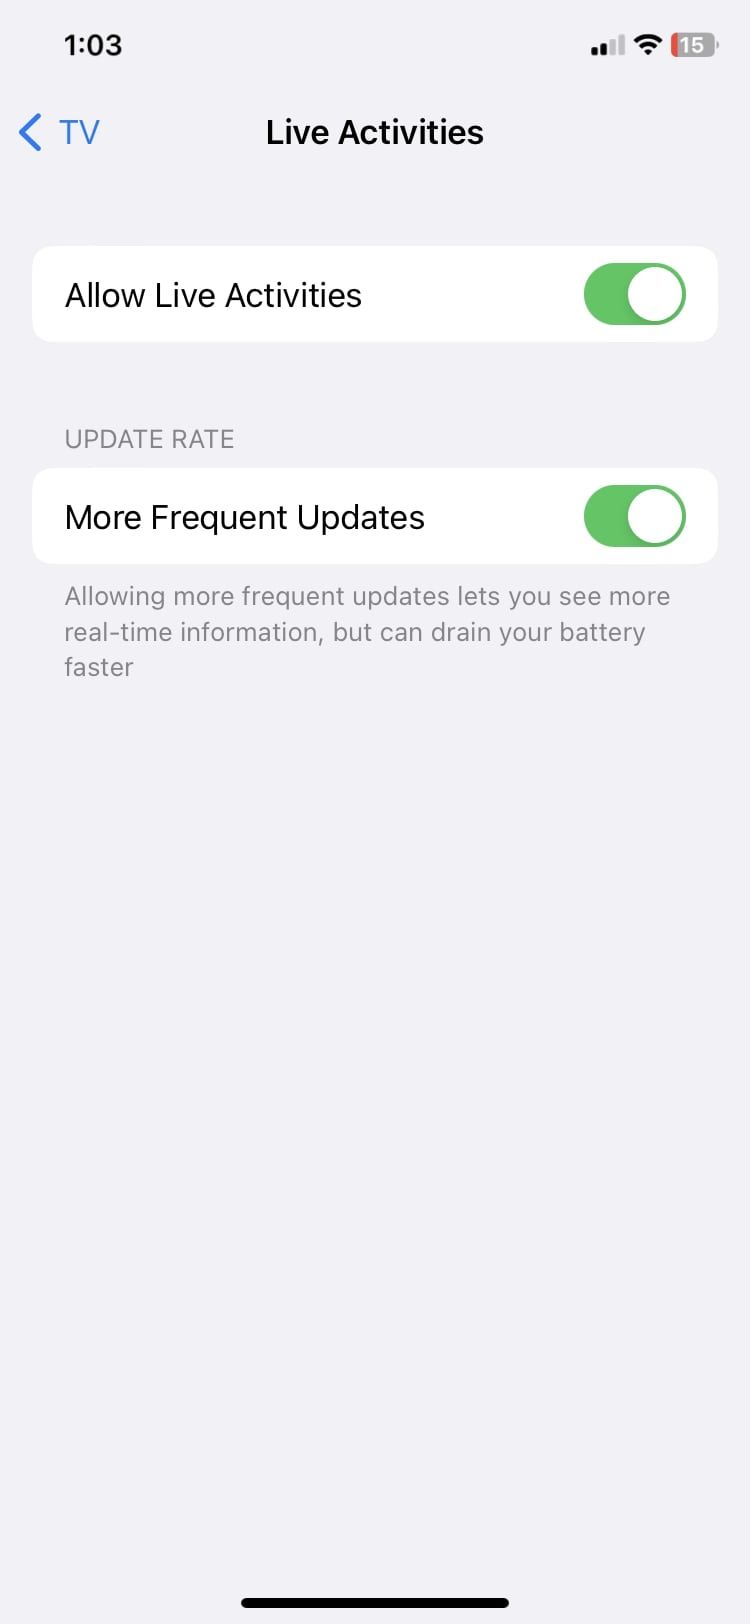 more frequent updates toggle